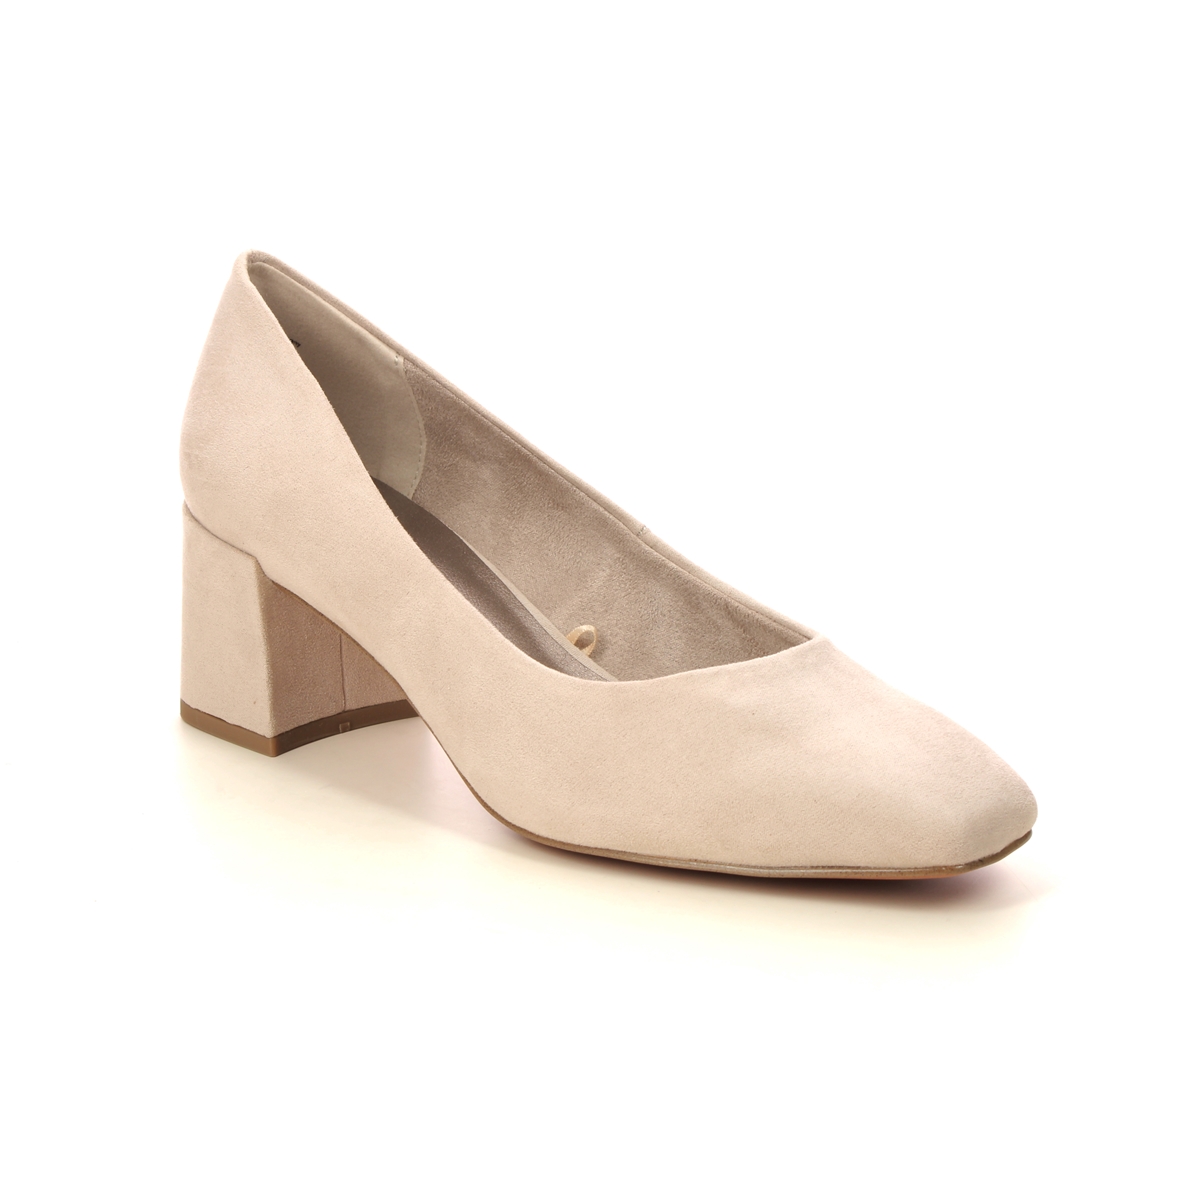 Marco Tozzi Bitto Beige Womens Court Shoes 22424-42-404 in a Plain Textile in Size 37